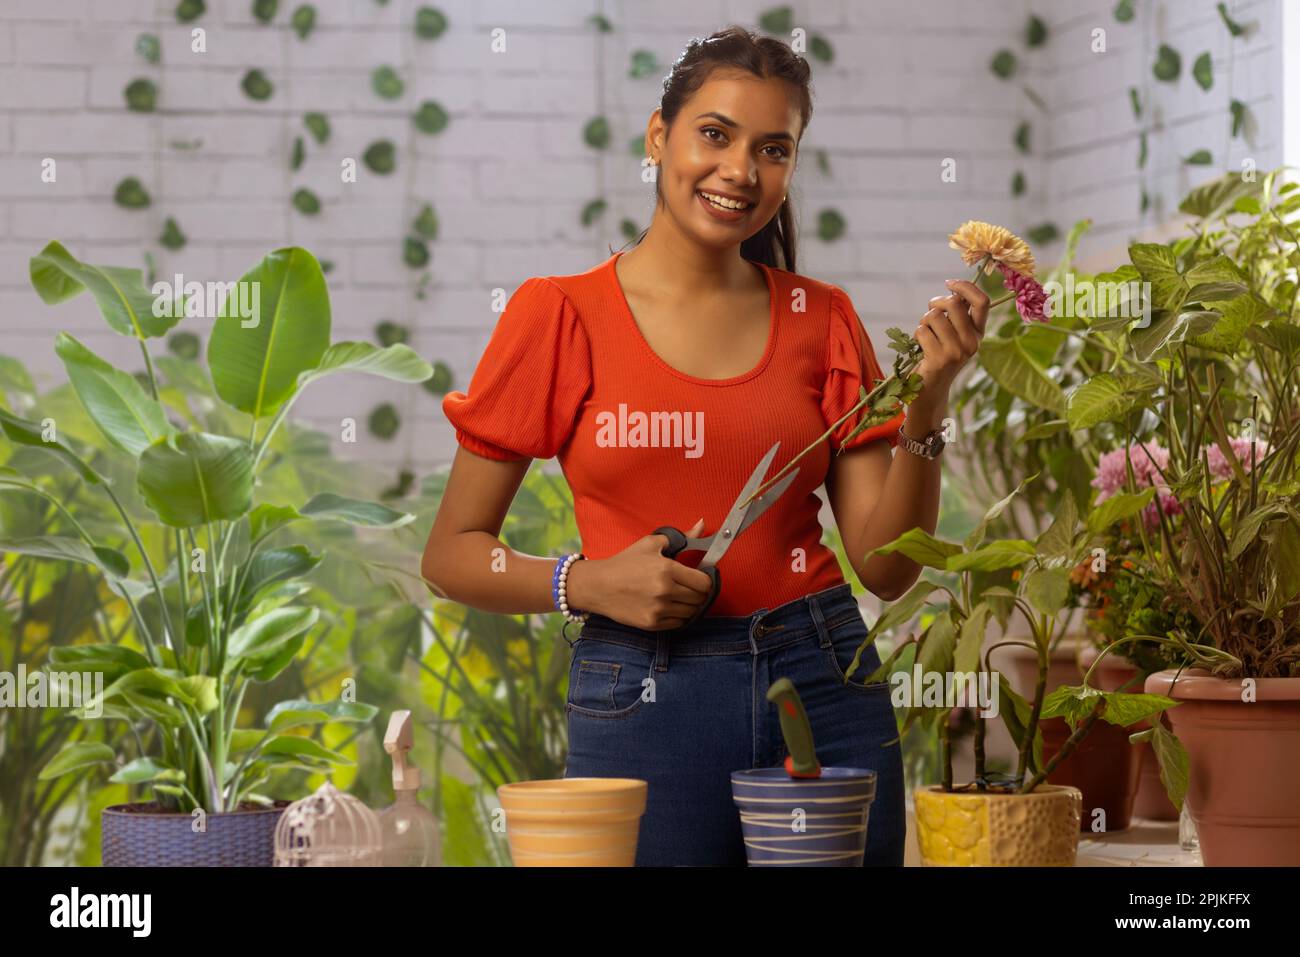 Portrait of young woman gardening at home Stock Photo